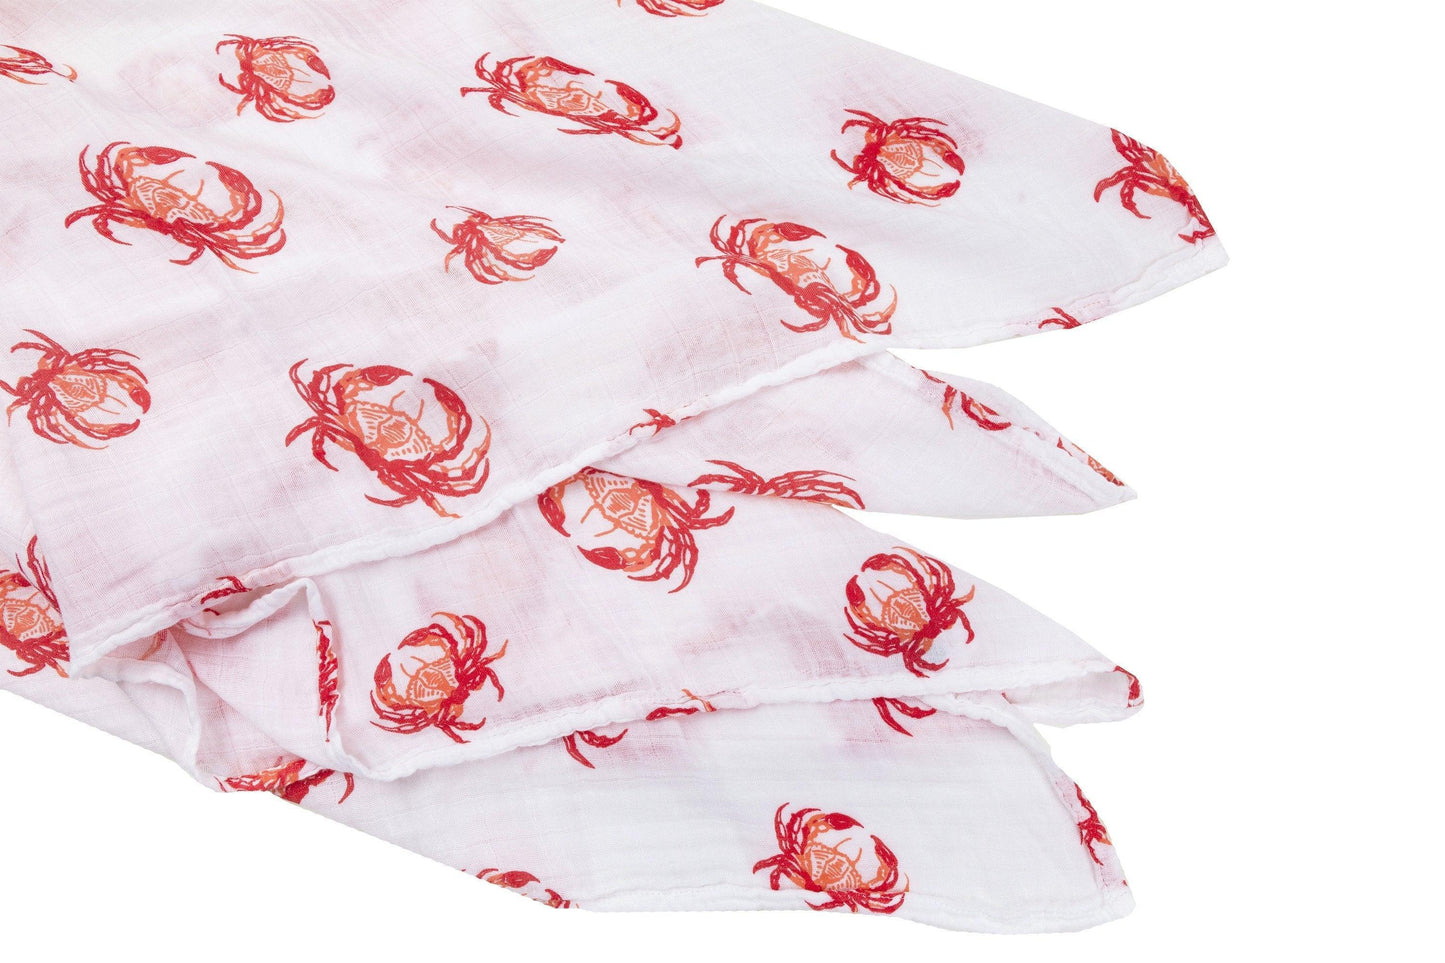 Pink crab-themed baby muslin swaddle blanket and burp cloth set, neatly folded on a white background.